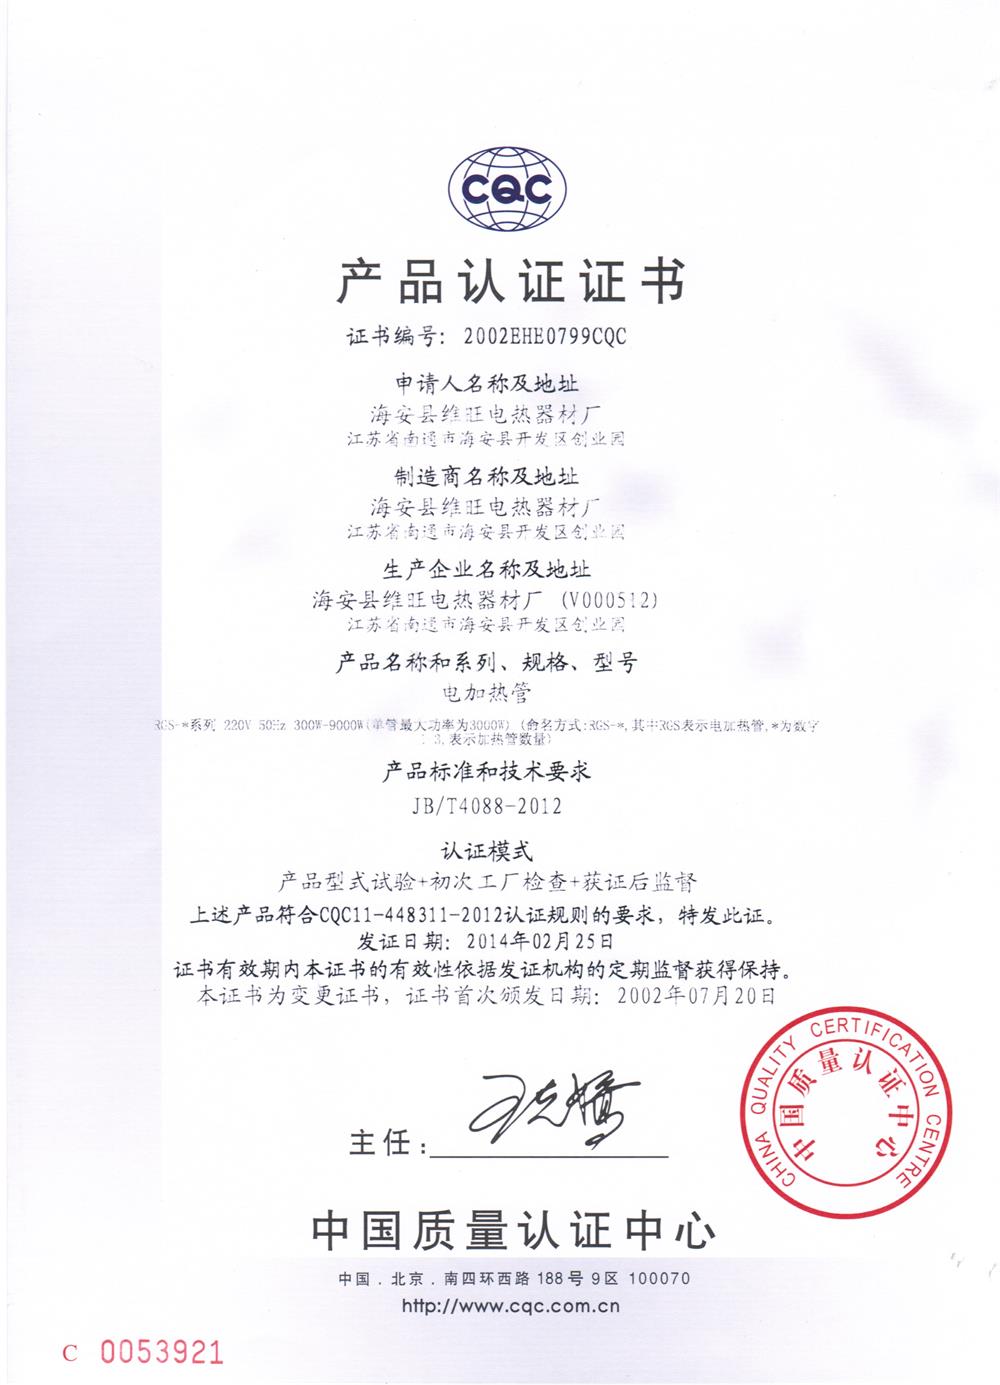  CCC certification